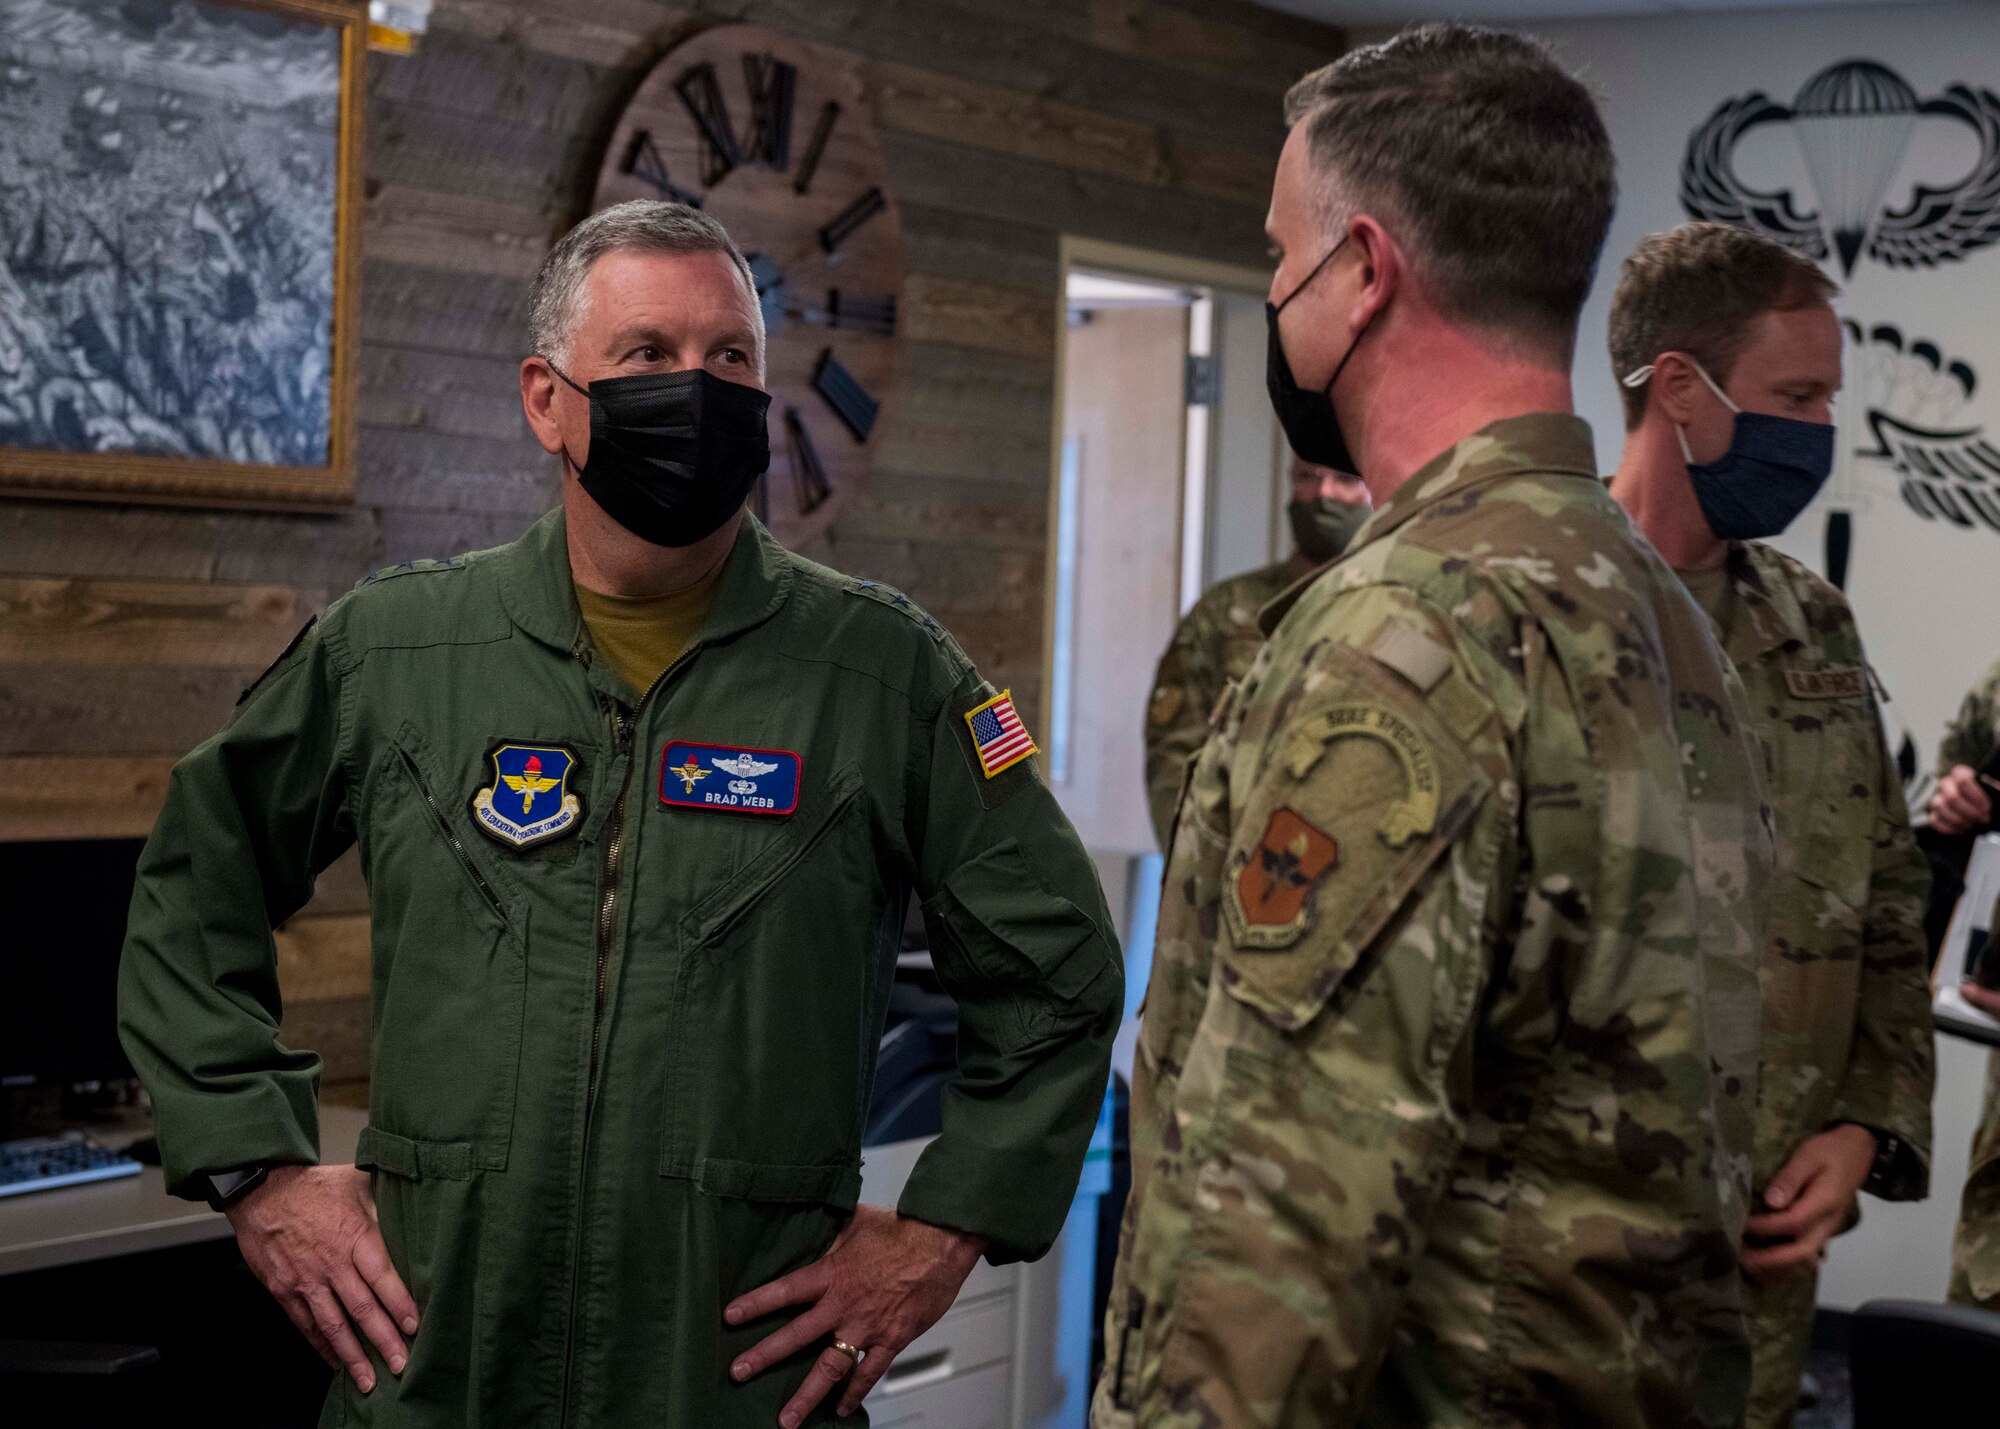 U.S. Air Force Lt. Gen. Brad Webb, commander of Air Education and Training Command, greets Airmen from the Survival, Evasion, Resistance and Escape water survival flight at Fairchild Air Force Base, Washington, Aug. 11, 2021. Webb’s visit included immersions with the 336 TRG’s SERE school, water survival training, 36th Rescue Squadron, and recognition of Air Force Special Warfare Airmen of the Year Award winners. SERE instruction concentrates on the principles, techniques and skills necessary to survive any environment, plus instructors conduct initial and follow-on training to all U.S. Air Force SERE specialists. (U.S. Air Force photo by Staff Sgt. Lawrence Sena)